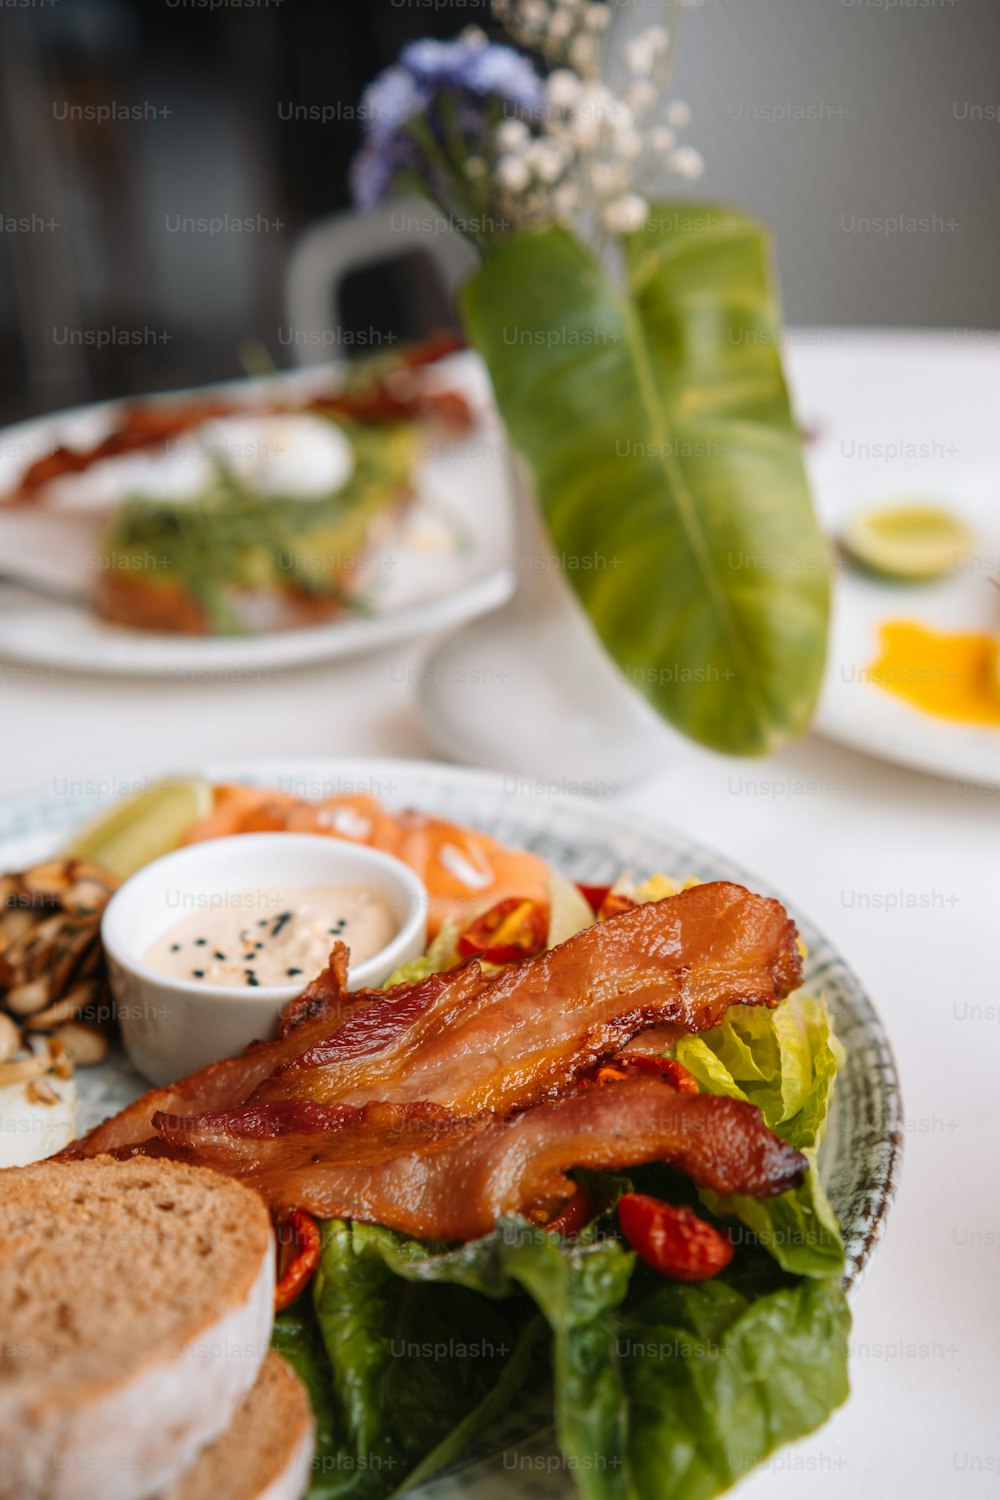 a plate with bacon, lettuce, toast, and other food items